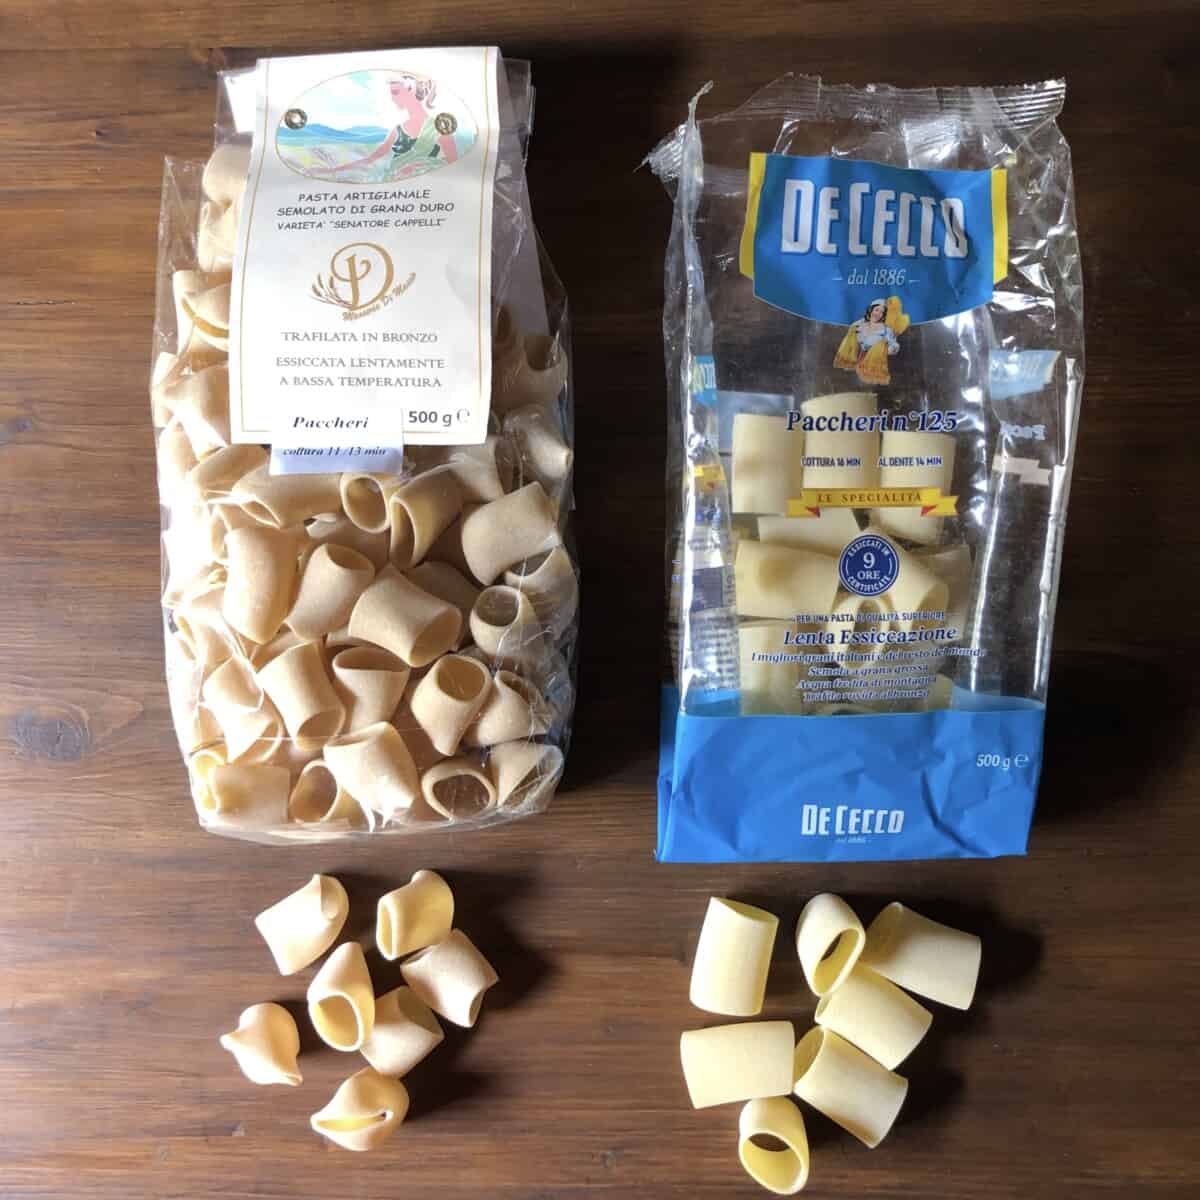 Two bags of Italian paccheri dried pasta: on the left, an artisanal paccheri pasta bronze drawn and made in Abruzzo, Italy and on the right, De Cecco pasta paccheri no. 125 paccheri pasta.